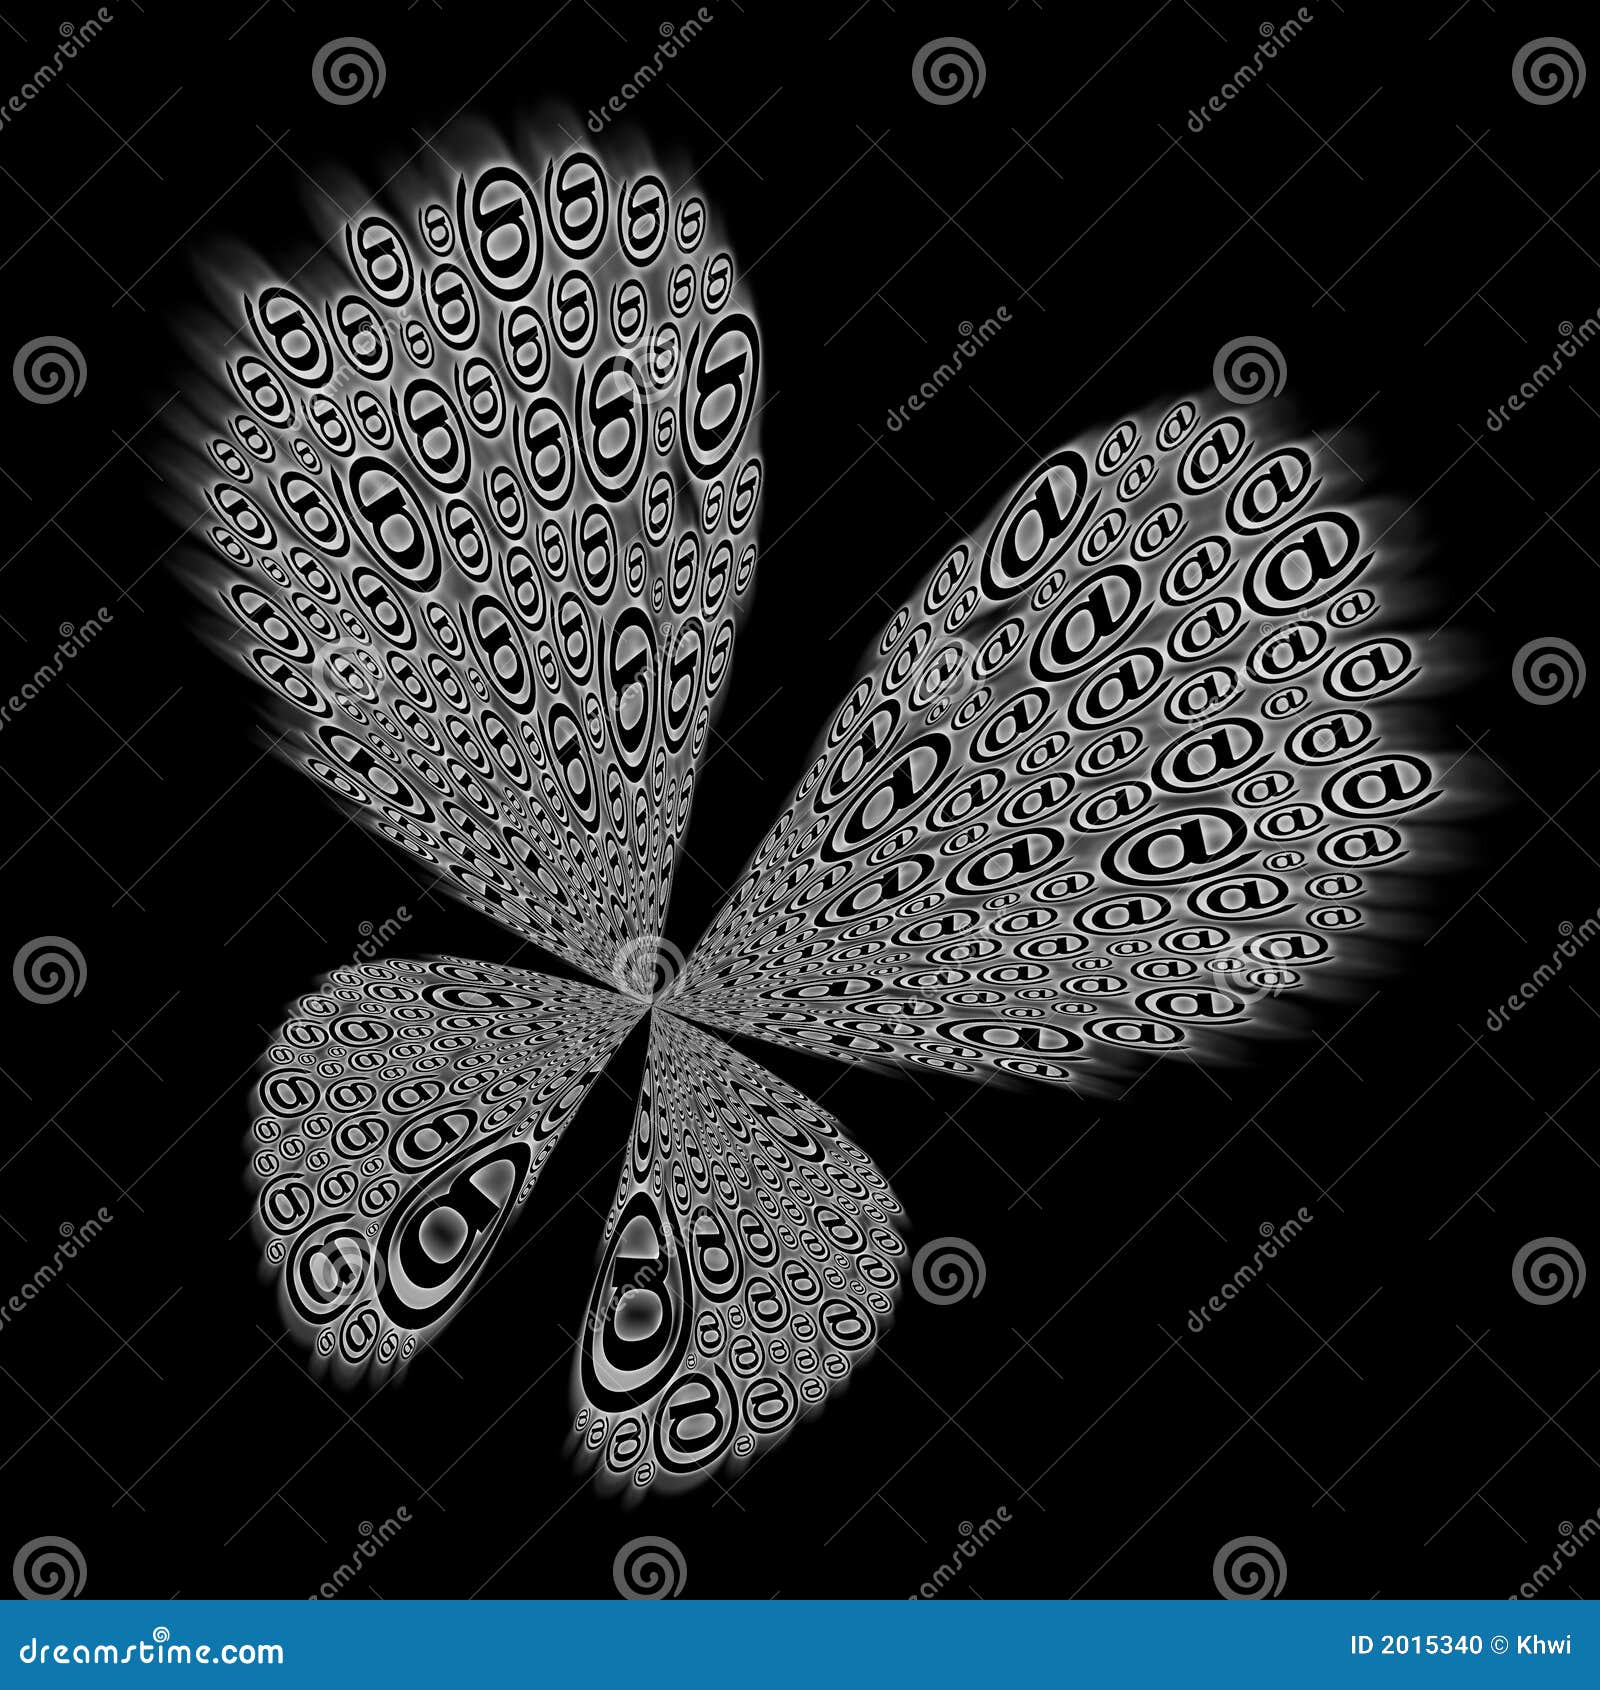 interactive butterfly